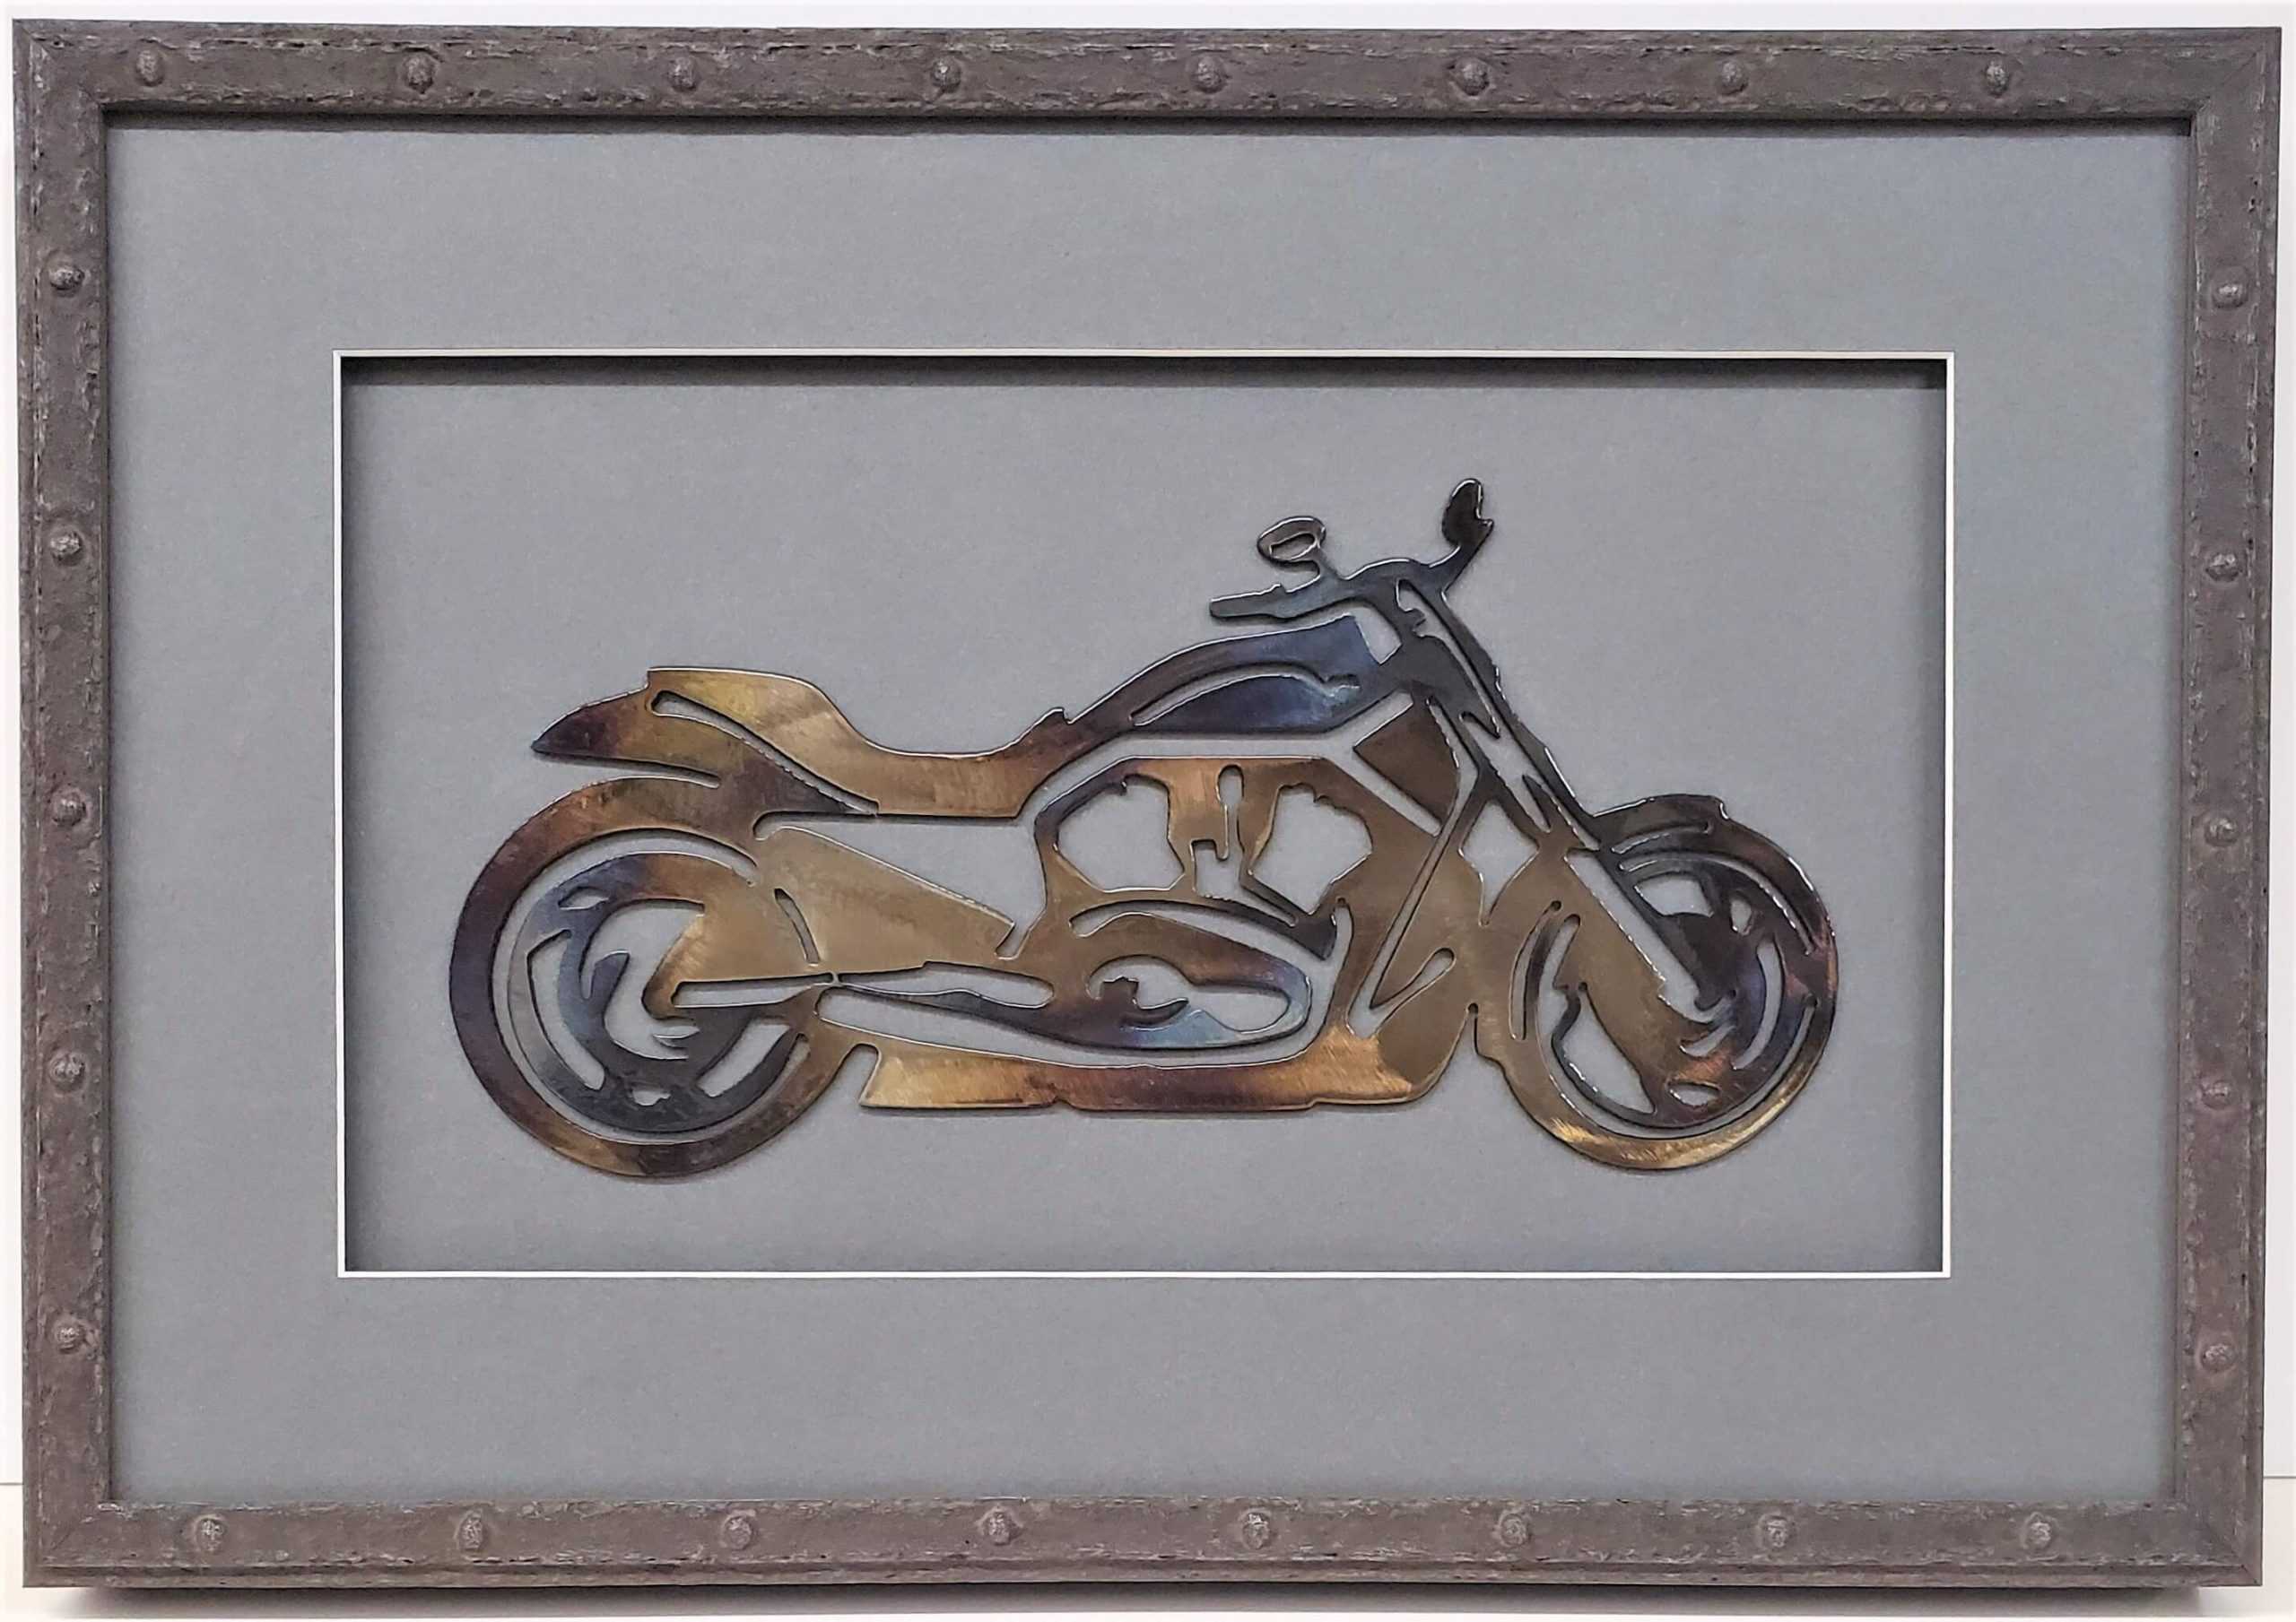 A metal motorcycle is framed in a gray frame.